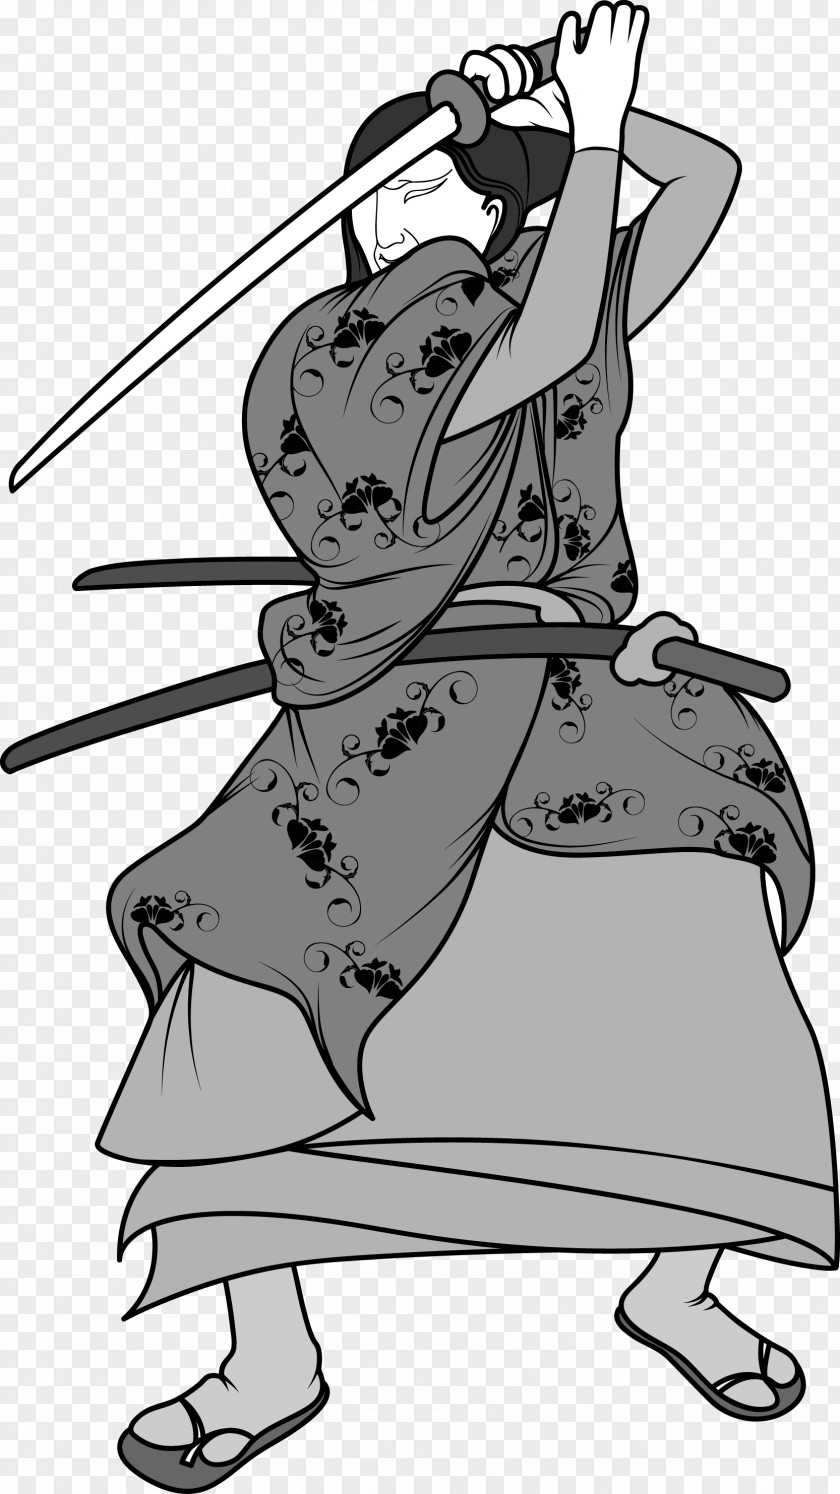 Japanese Ninja Bodyguard Warrior Black And White Picture Drawing Clip Art PNG